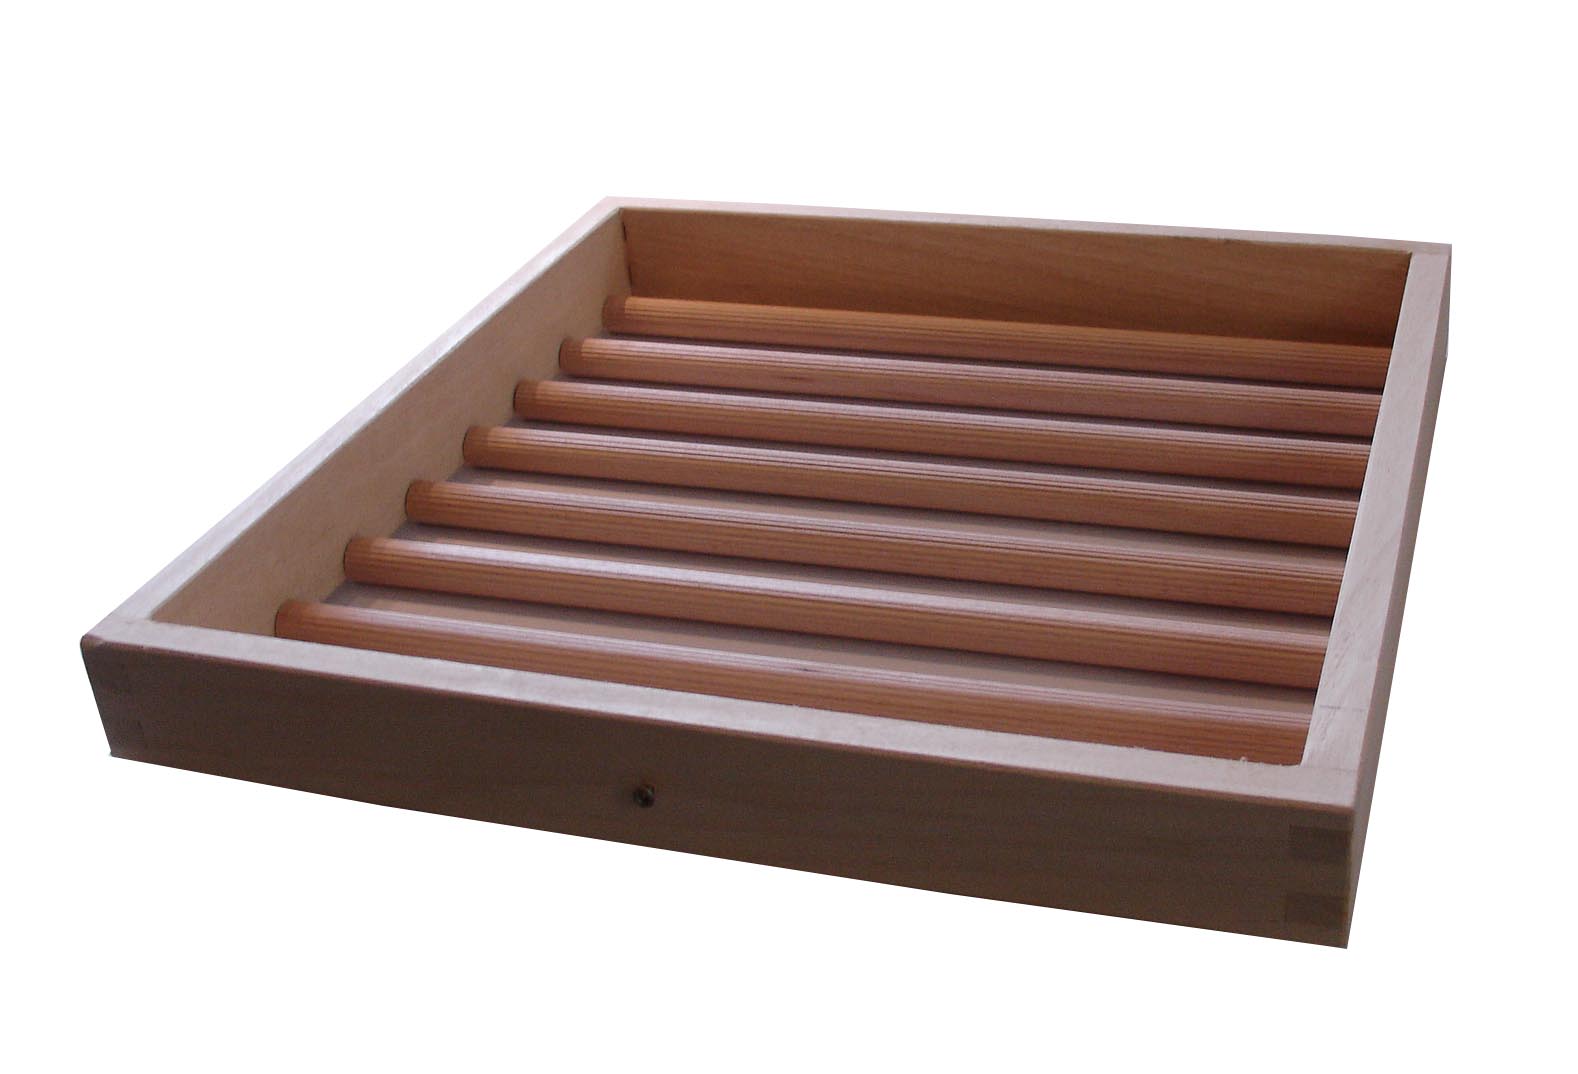 Surcharge: choice of tray (size 2, wooden)